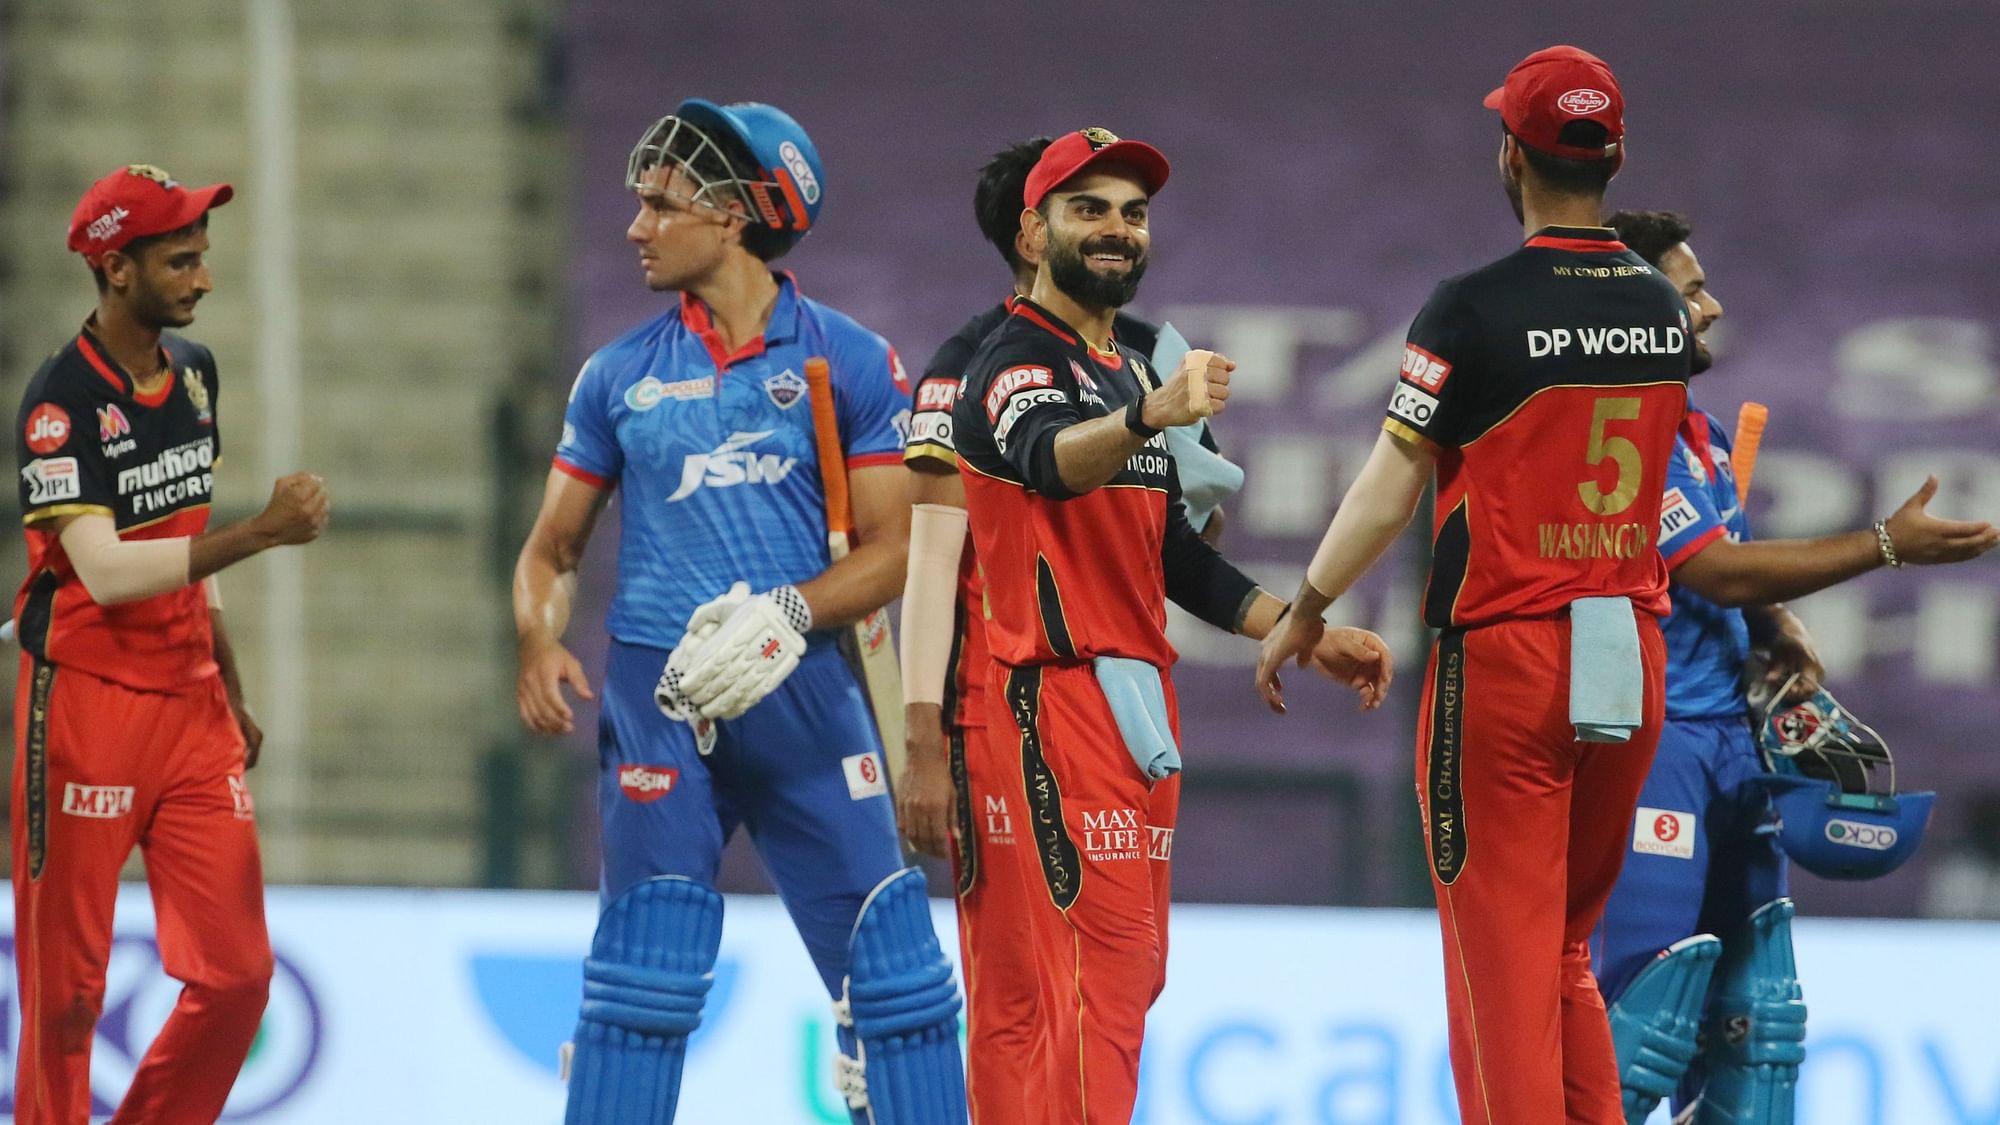 Delhi Capitals and Royal Challengers Bangalore go through to the playoffs as 2nd and 3rd ranked teams respectively.&nbsp;